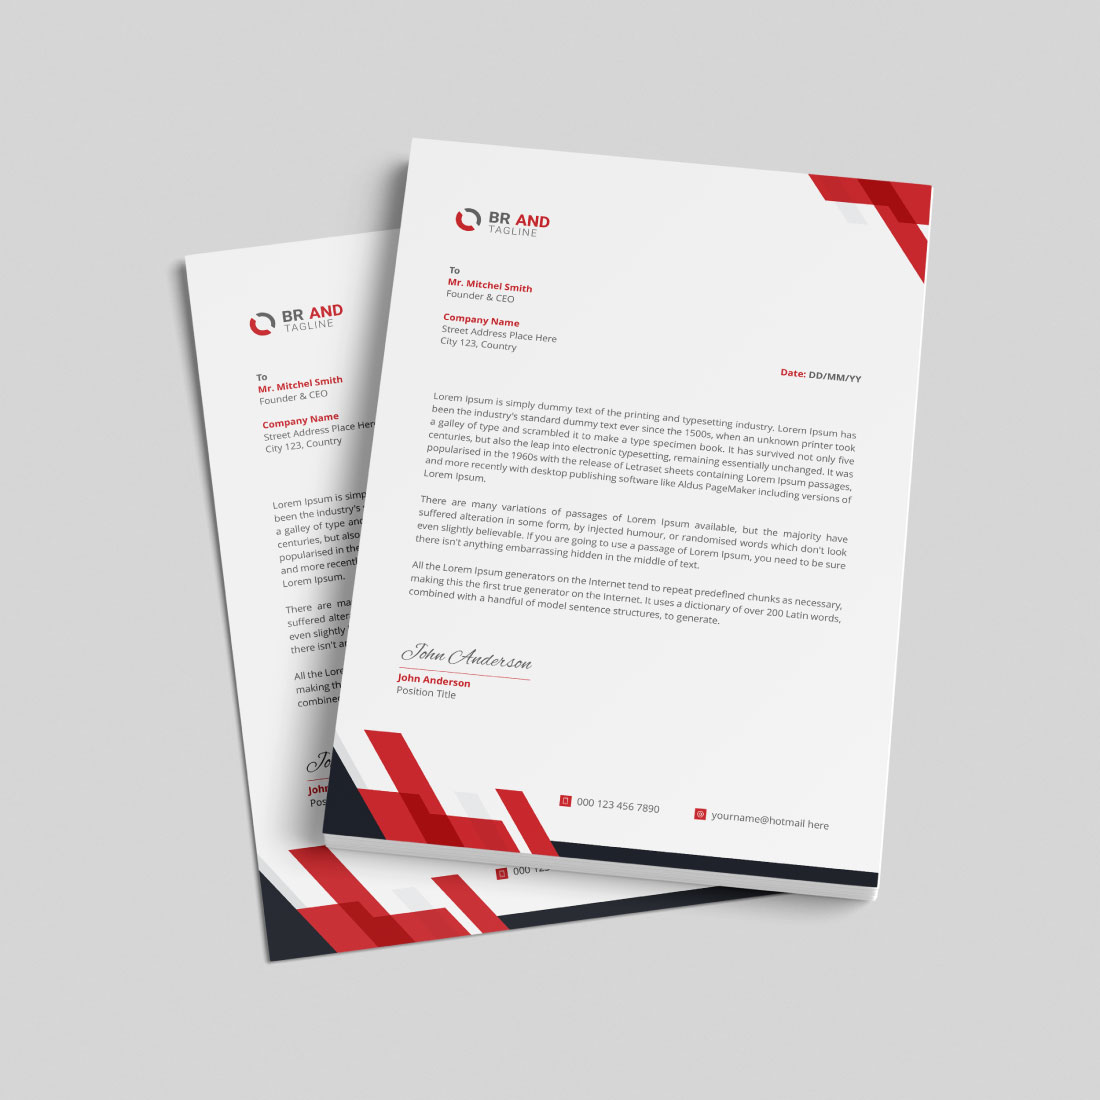 Two letterheads with a red and black stripe on them.